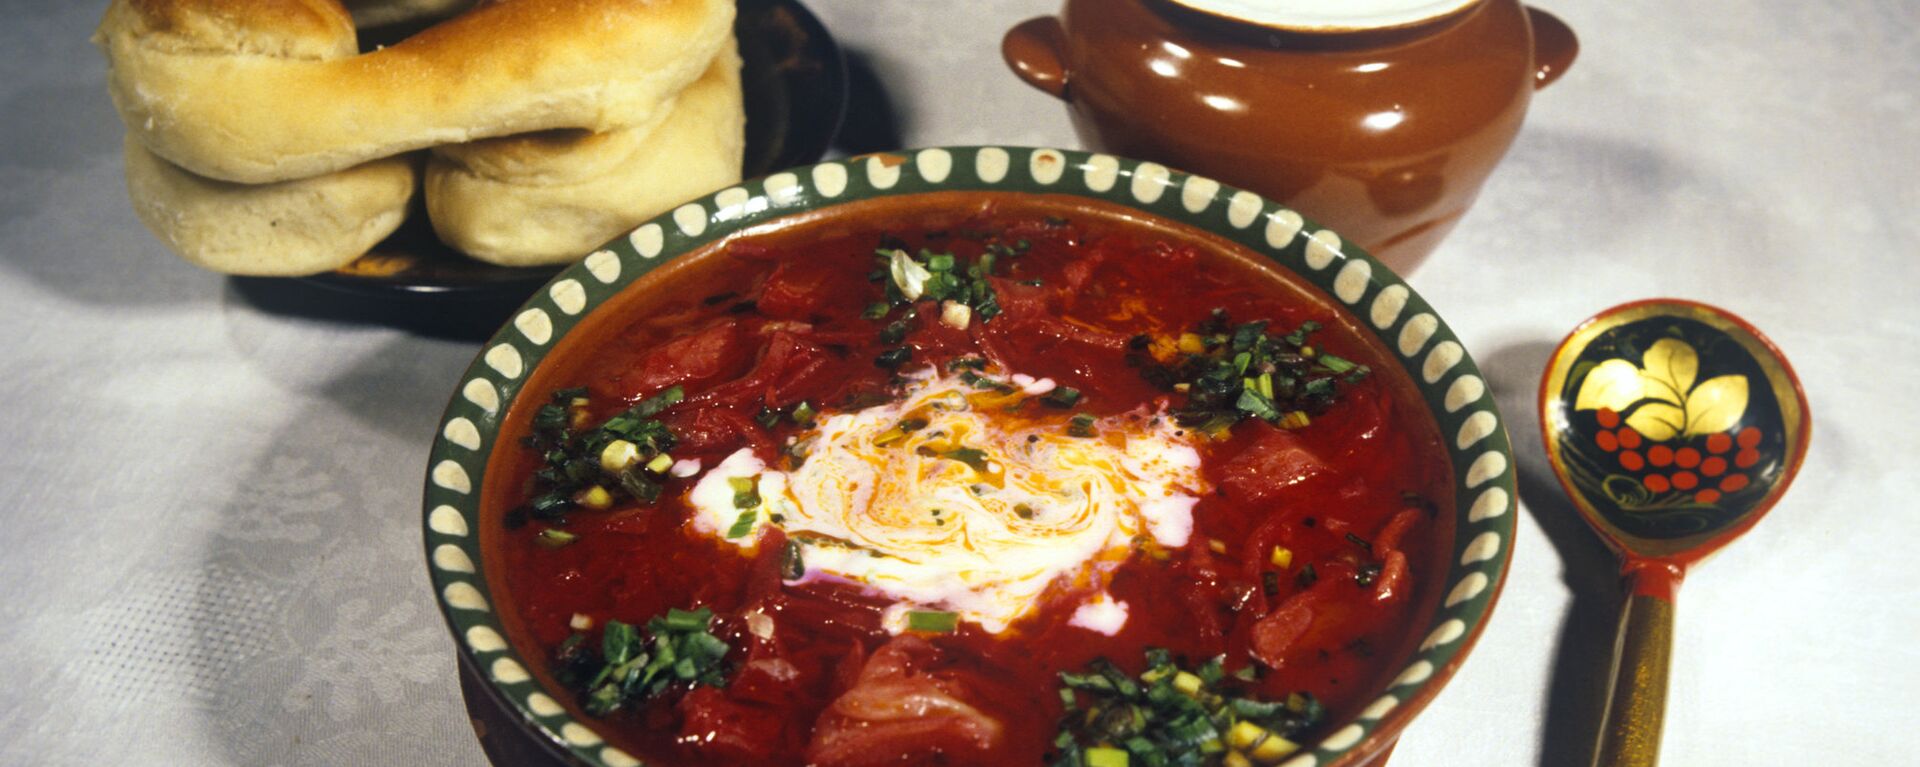 Borsch, a hearty soup made of beets and meat stock, is a national dish of Ukraine (archive) - Sputnik International, 1920, 25.06.2013